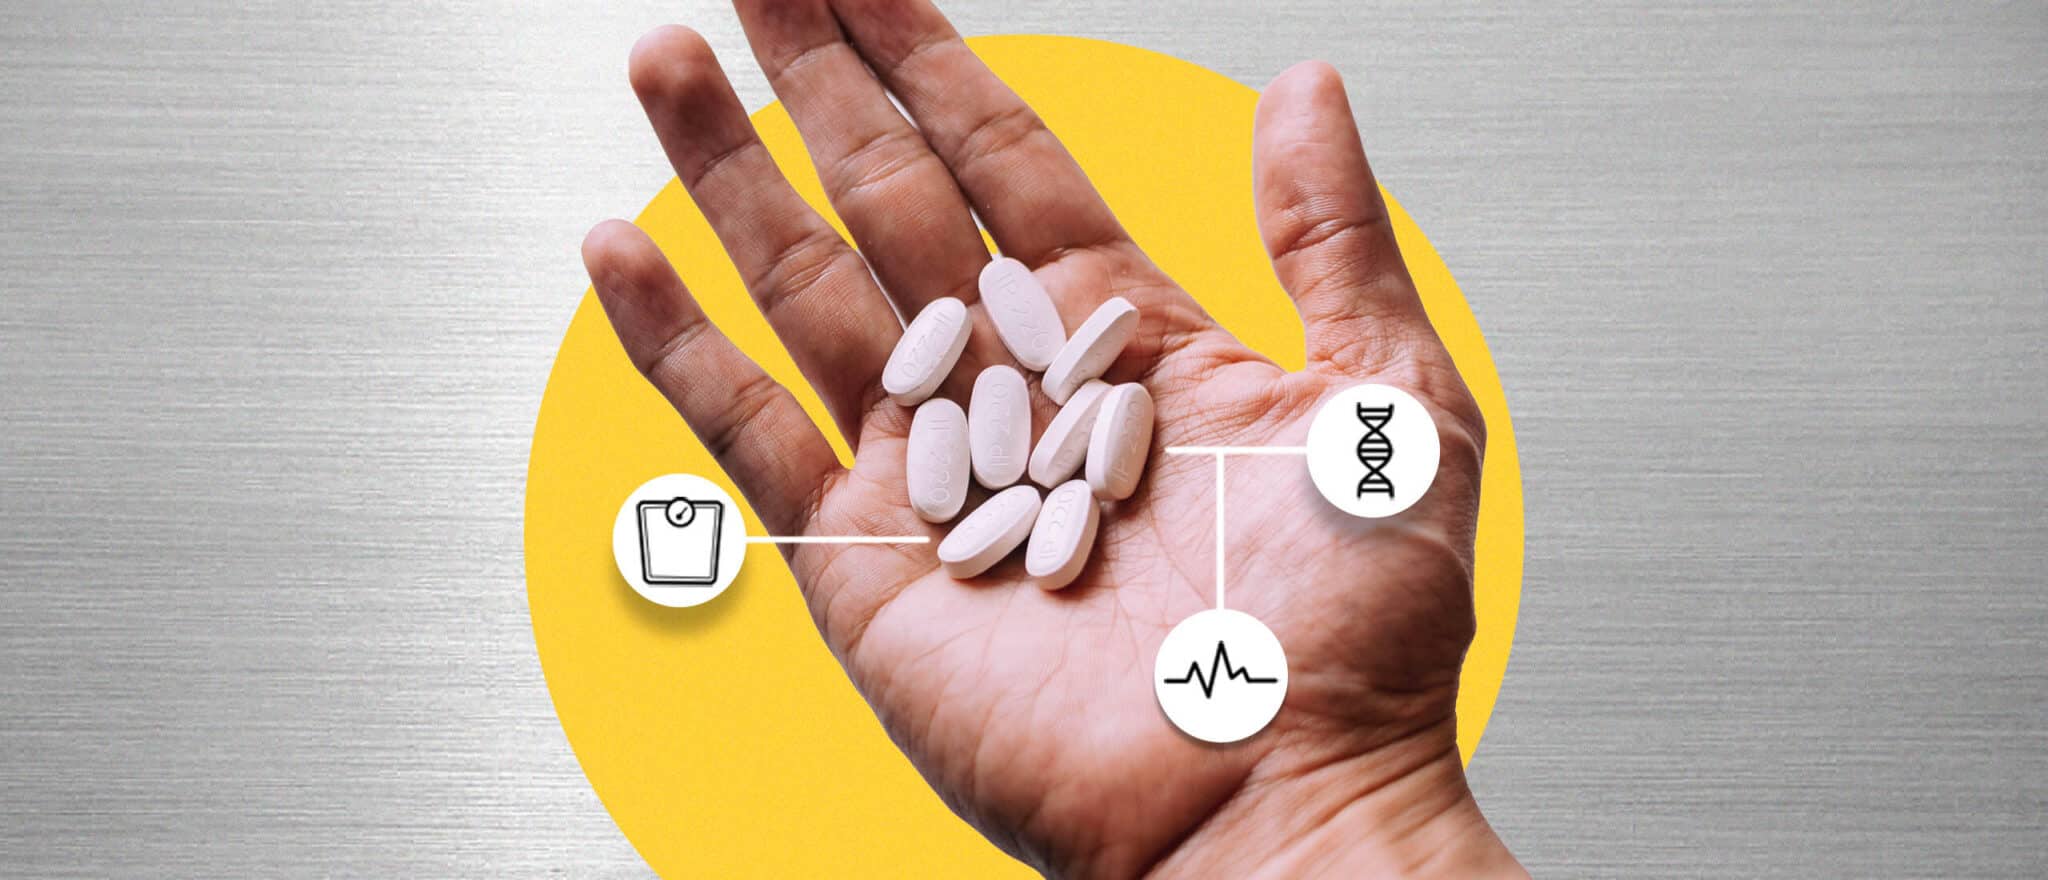 Questions About Buying Metformin Online? We Have Answers.